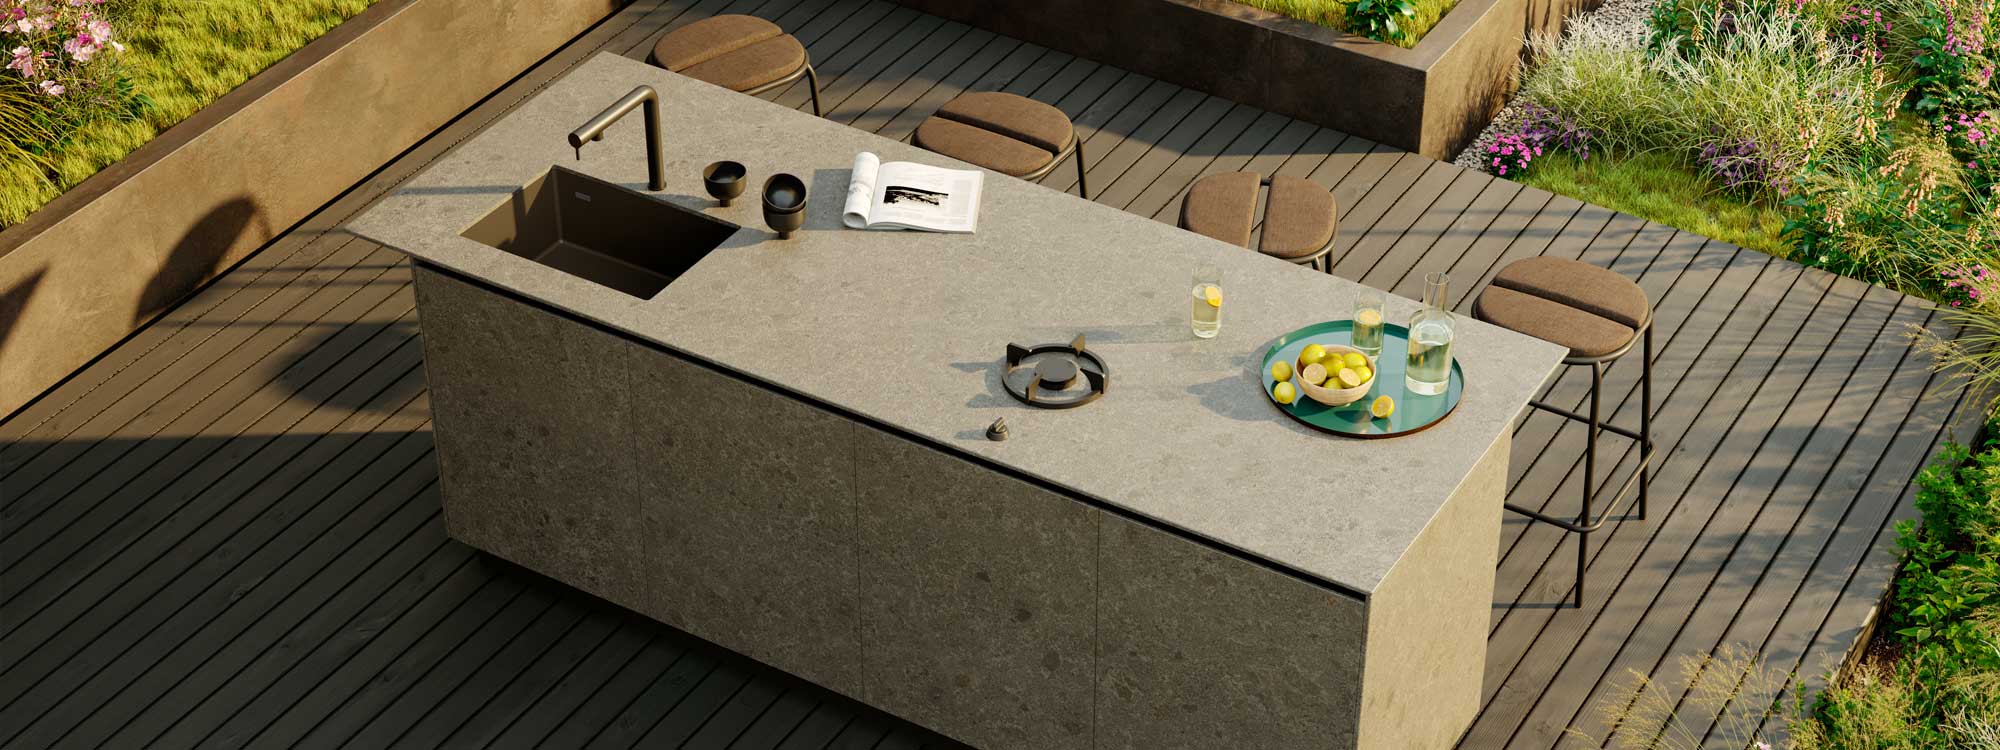 Image of OicCook ceramic outdoor kitchen island with sink and gas hob, with Parc stools next to countertop surface